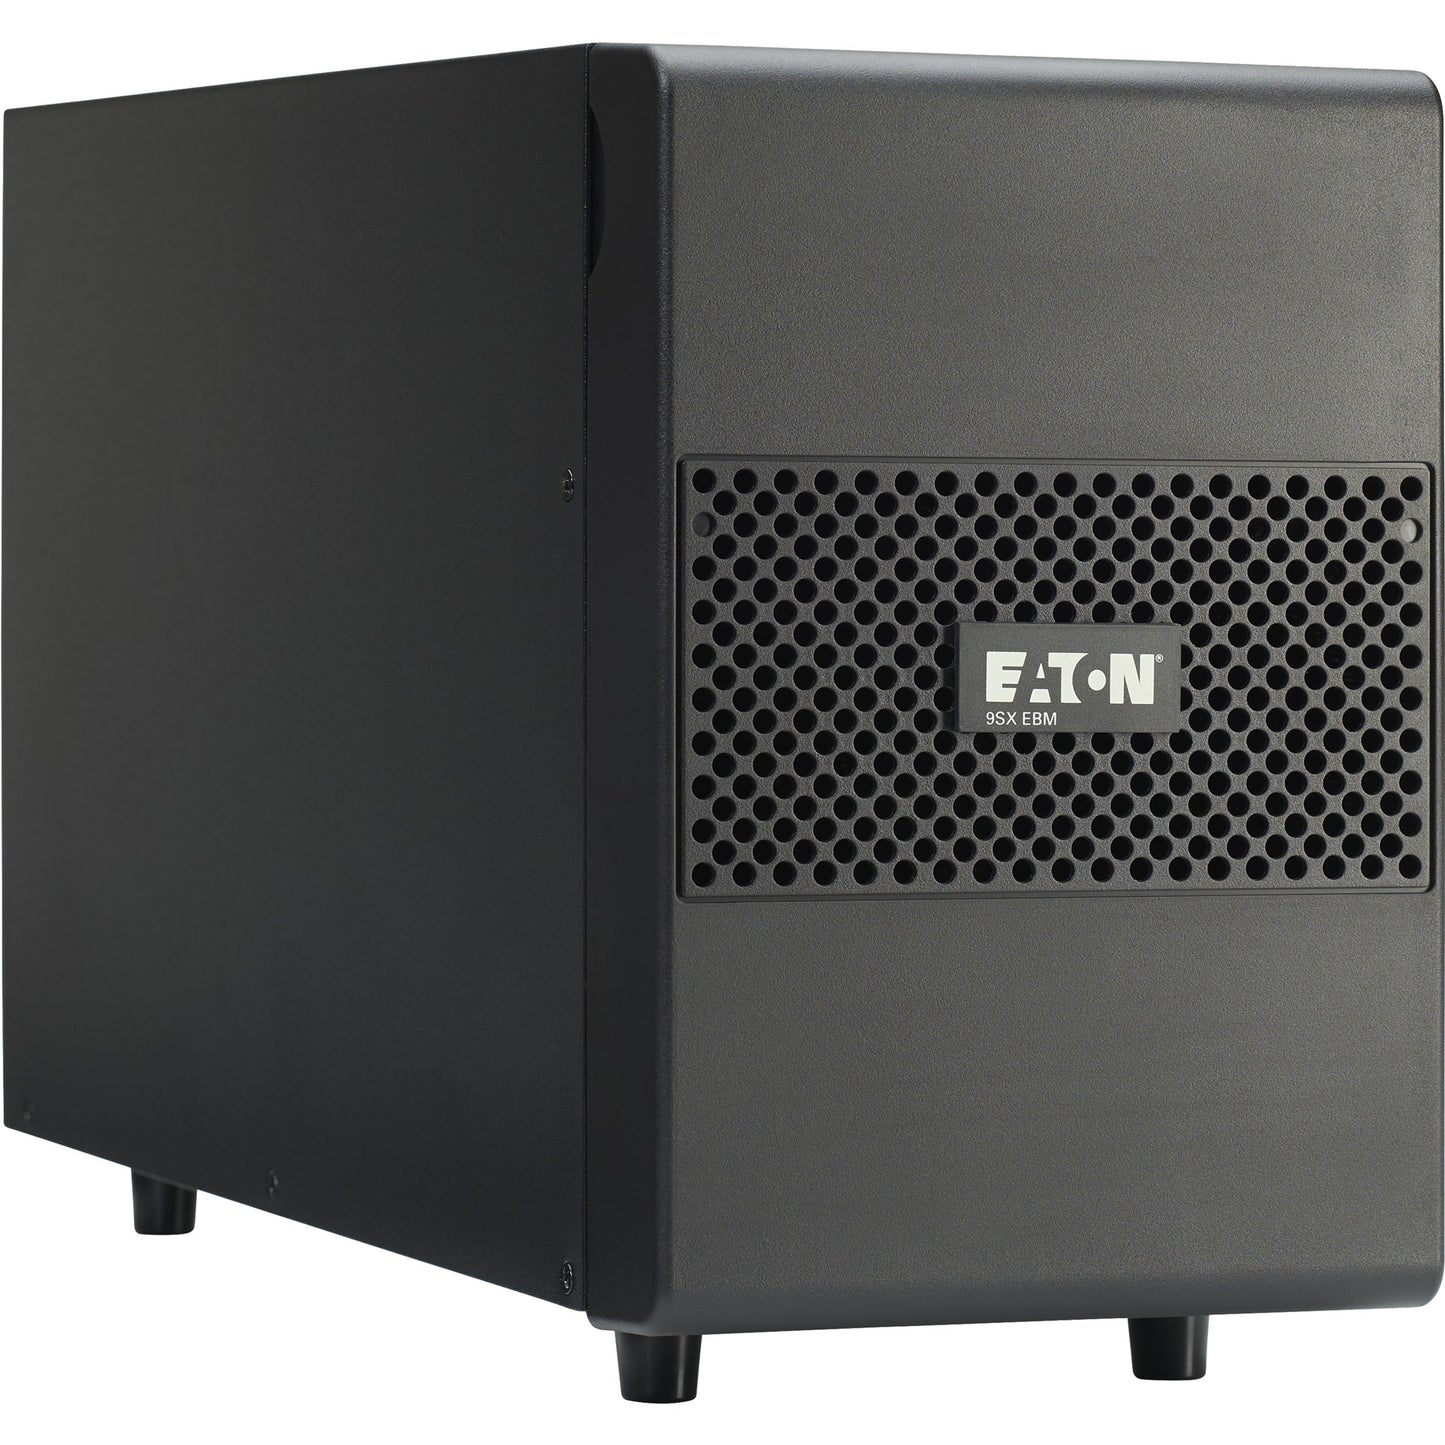 Eaton 48V Extended Battery Module (EBM) for 9SX1500 and 9SX1500G UPS Systems Tower